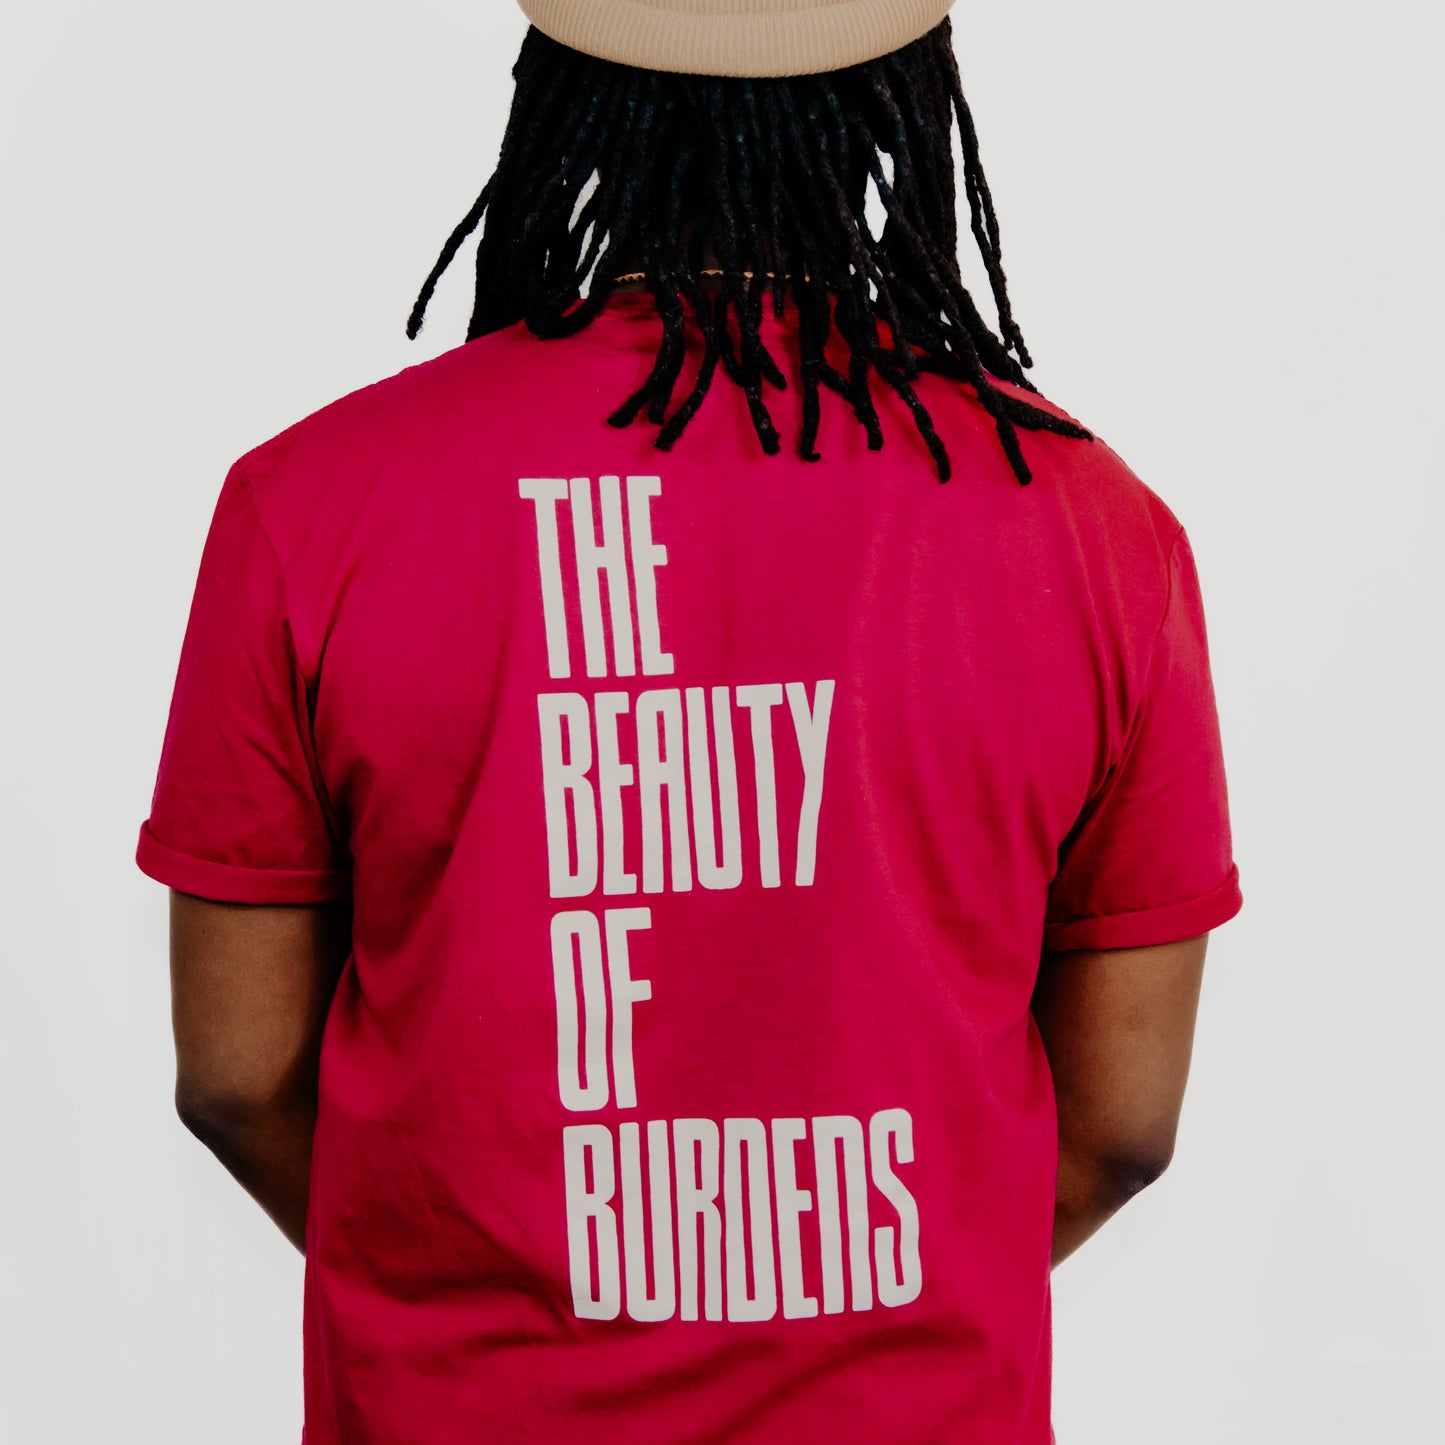 Beauty of Burdens - Red T-Shirt